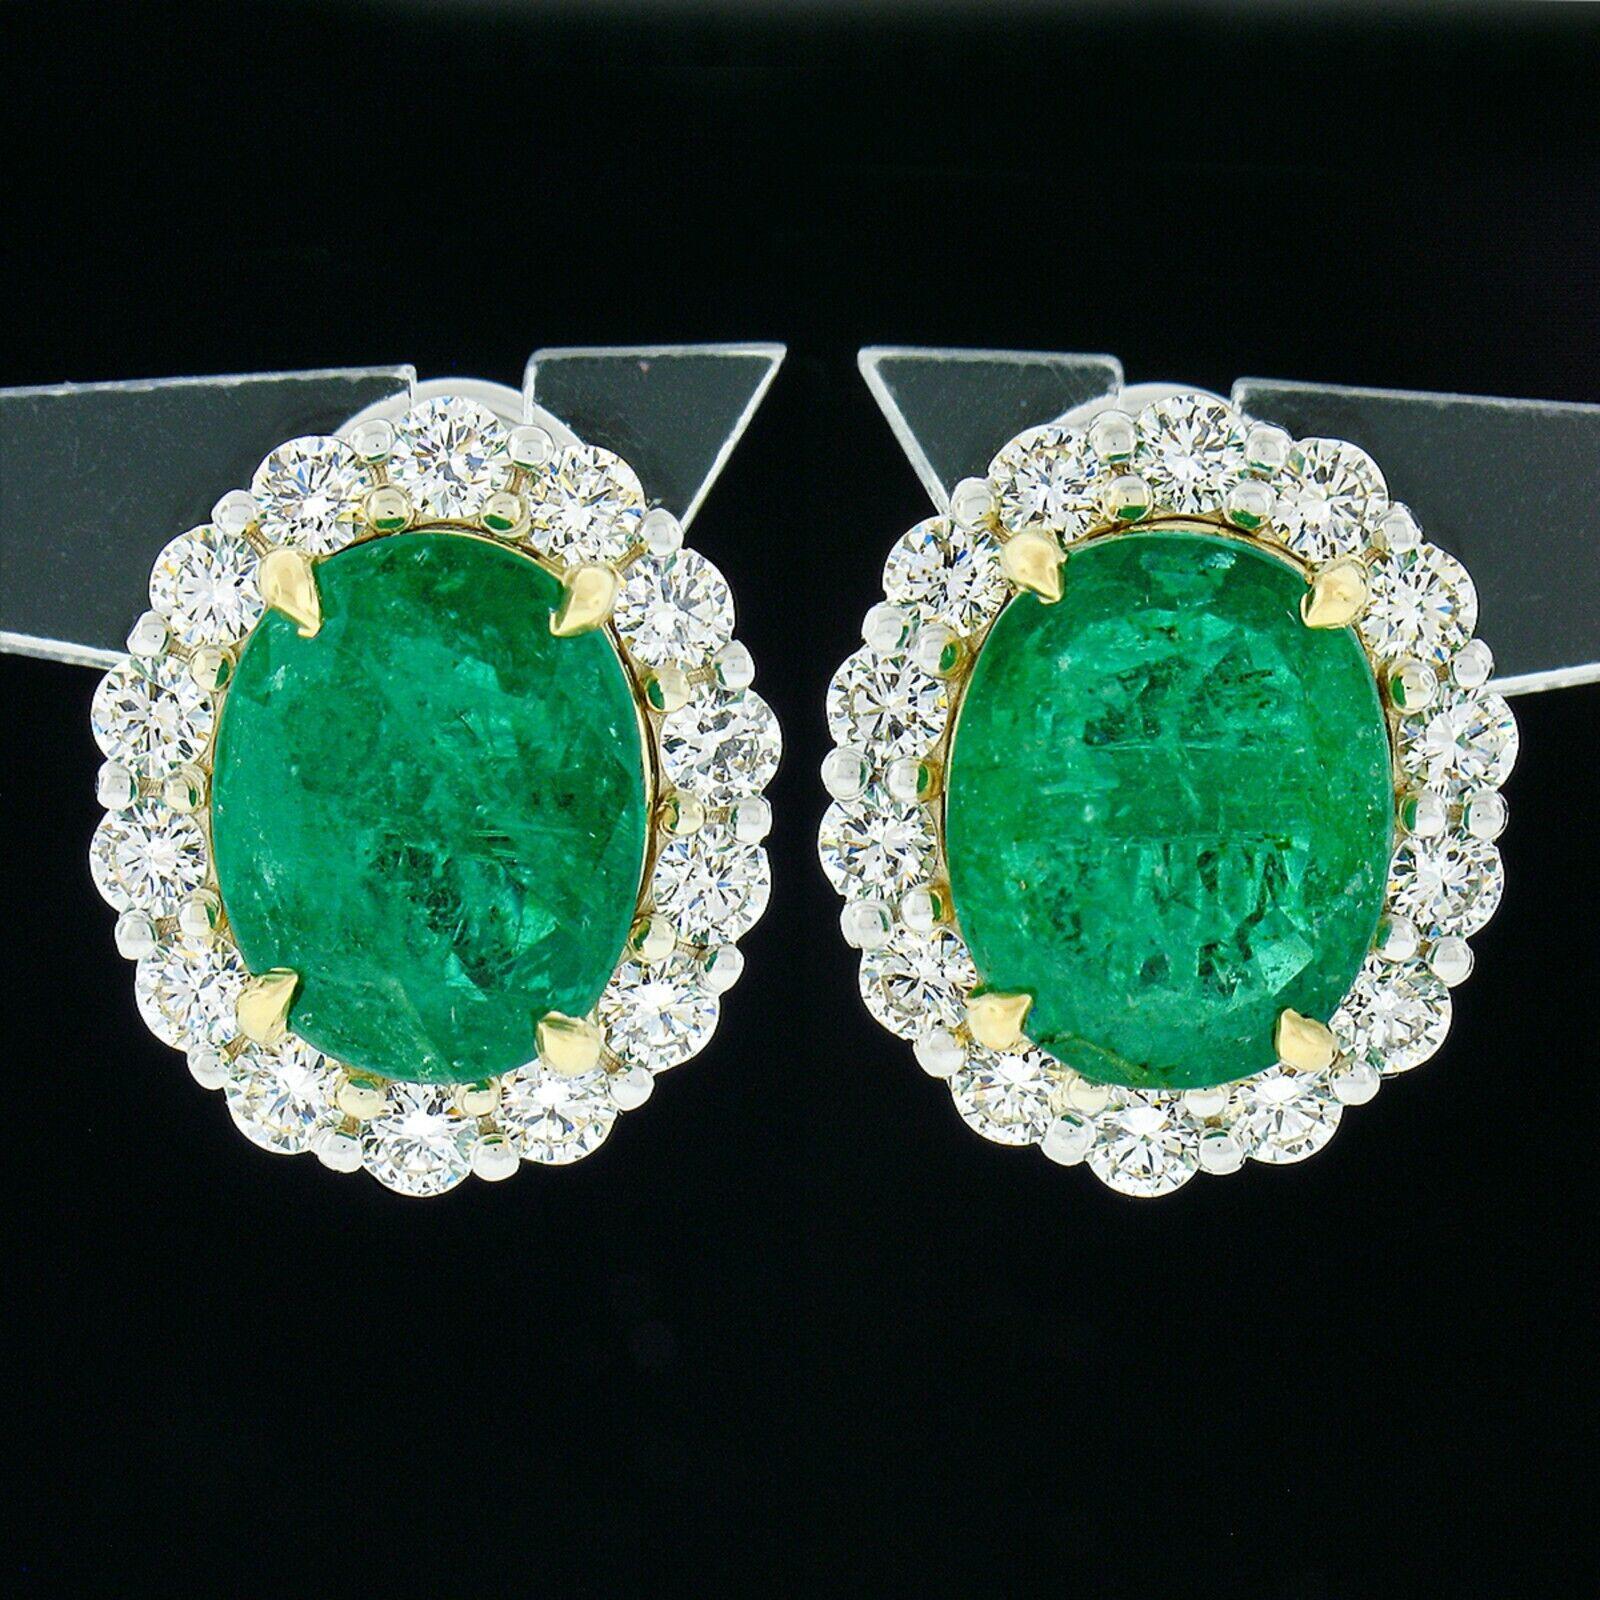 You are looking at a truly breathtaking pair of earrings that are newly crafted from 18k solid white gold with a yellow gold center basket that features a large, GIA certified, oval brilliant cut emerald in which together total an incredible 10.78